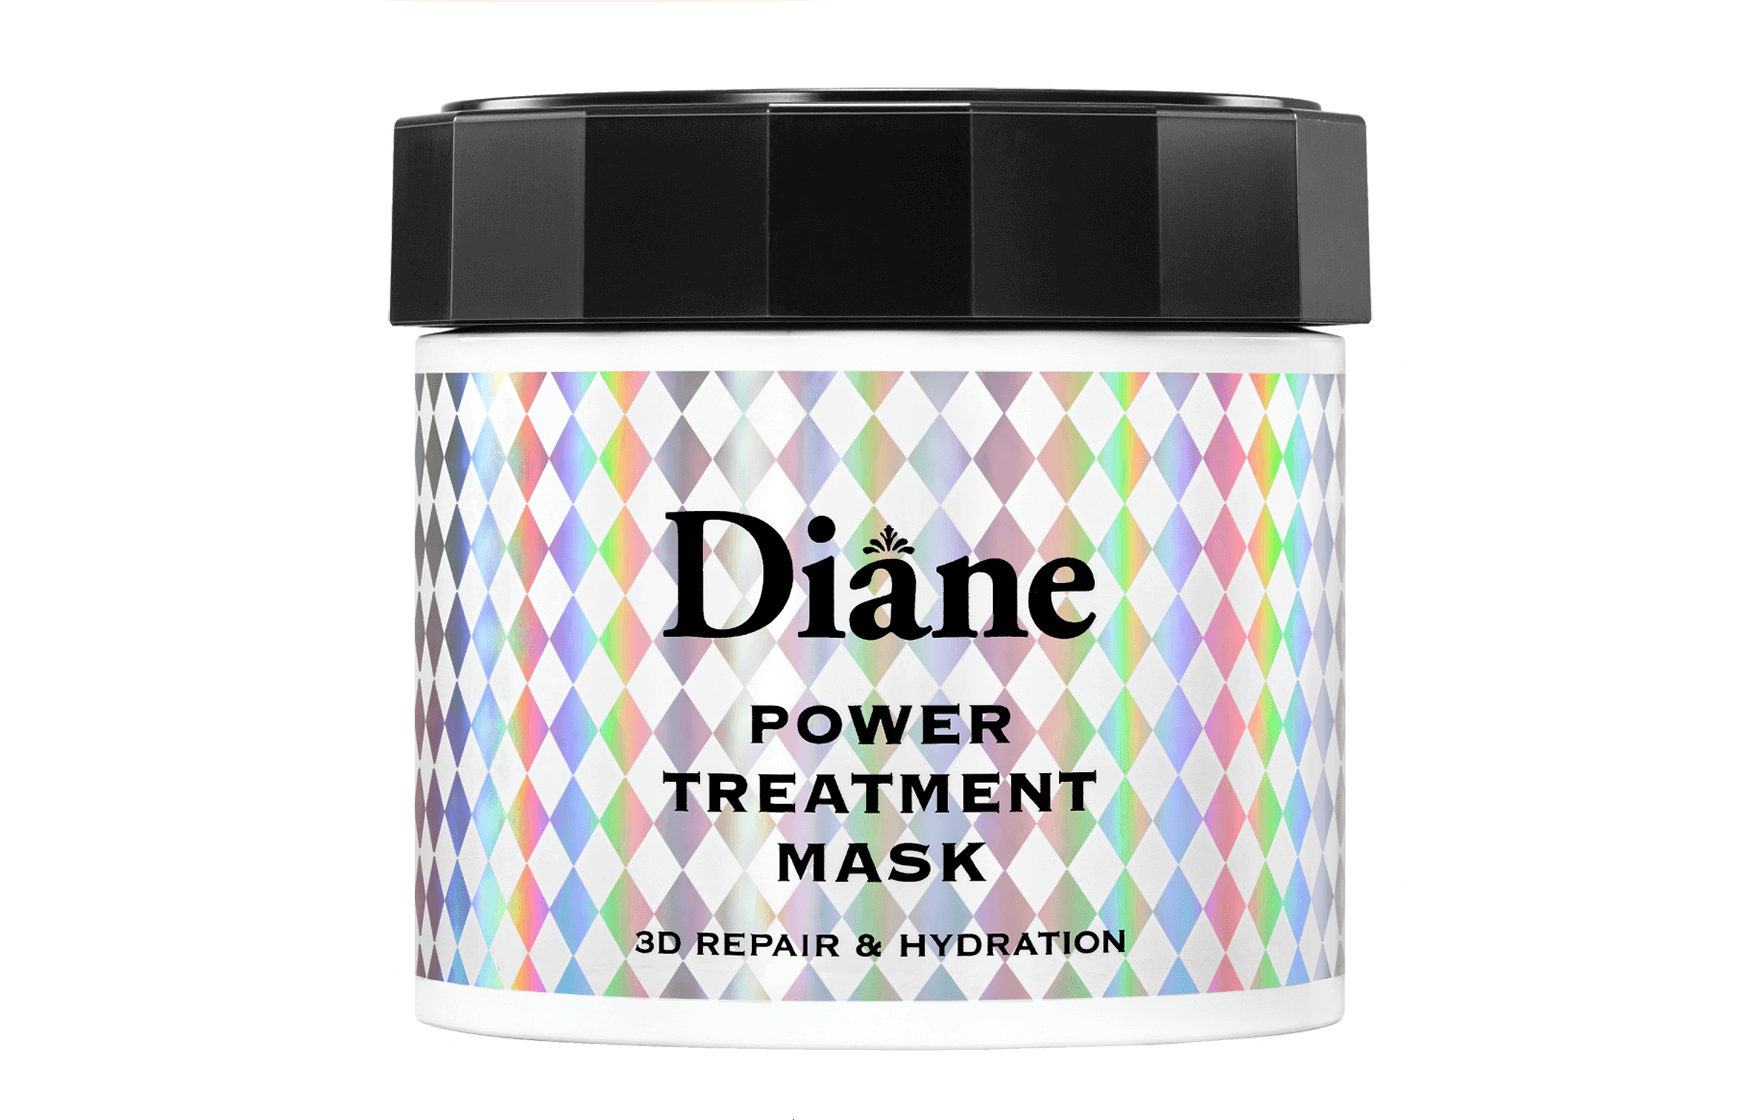 Our All-New Diane Hair Mask